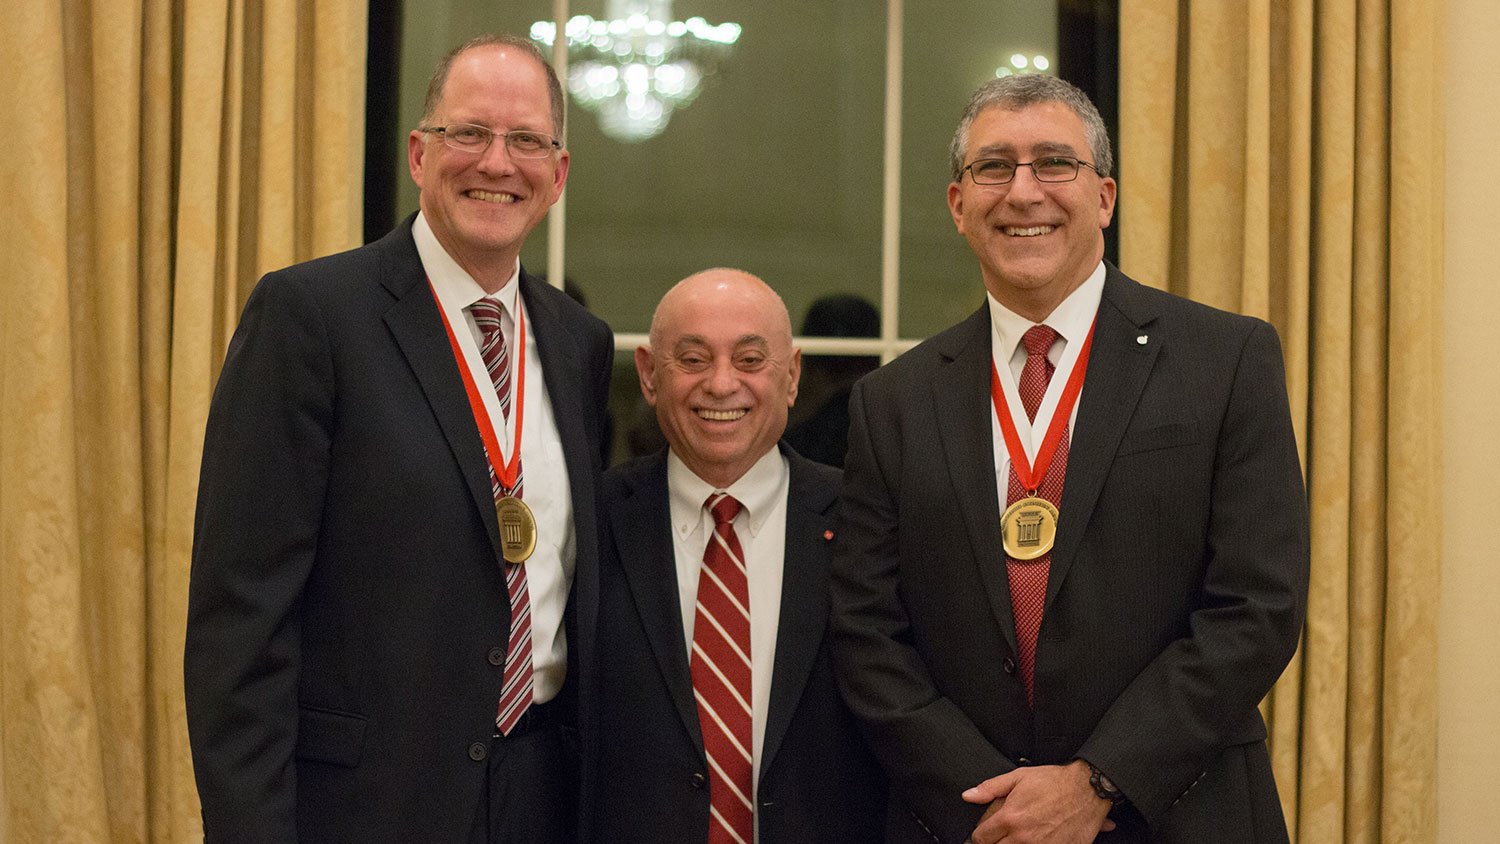 Dr. Louis A. Martin-Vega, dean of the College, recognized 2017 Distinguished Engineering Alumni Hassan and Icenhour at a banquet on Nov. 1.